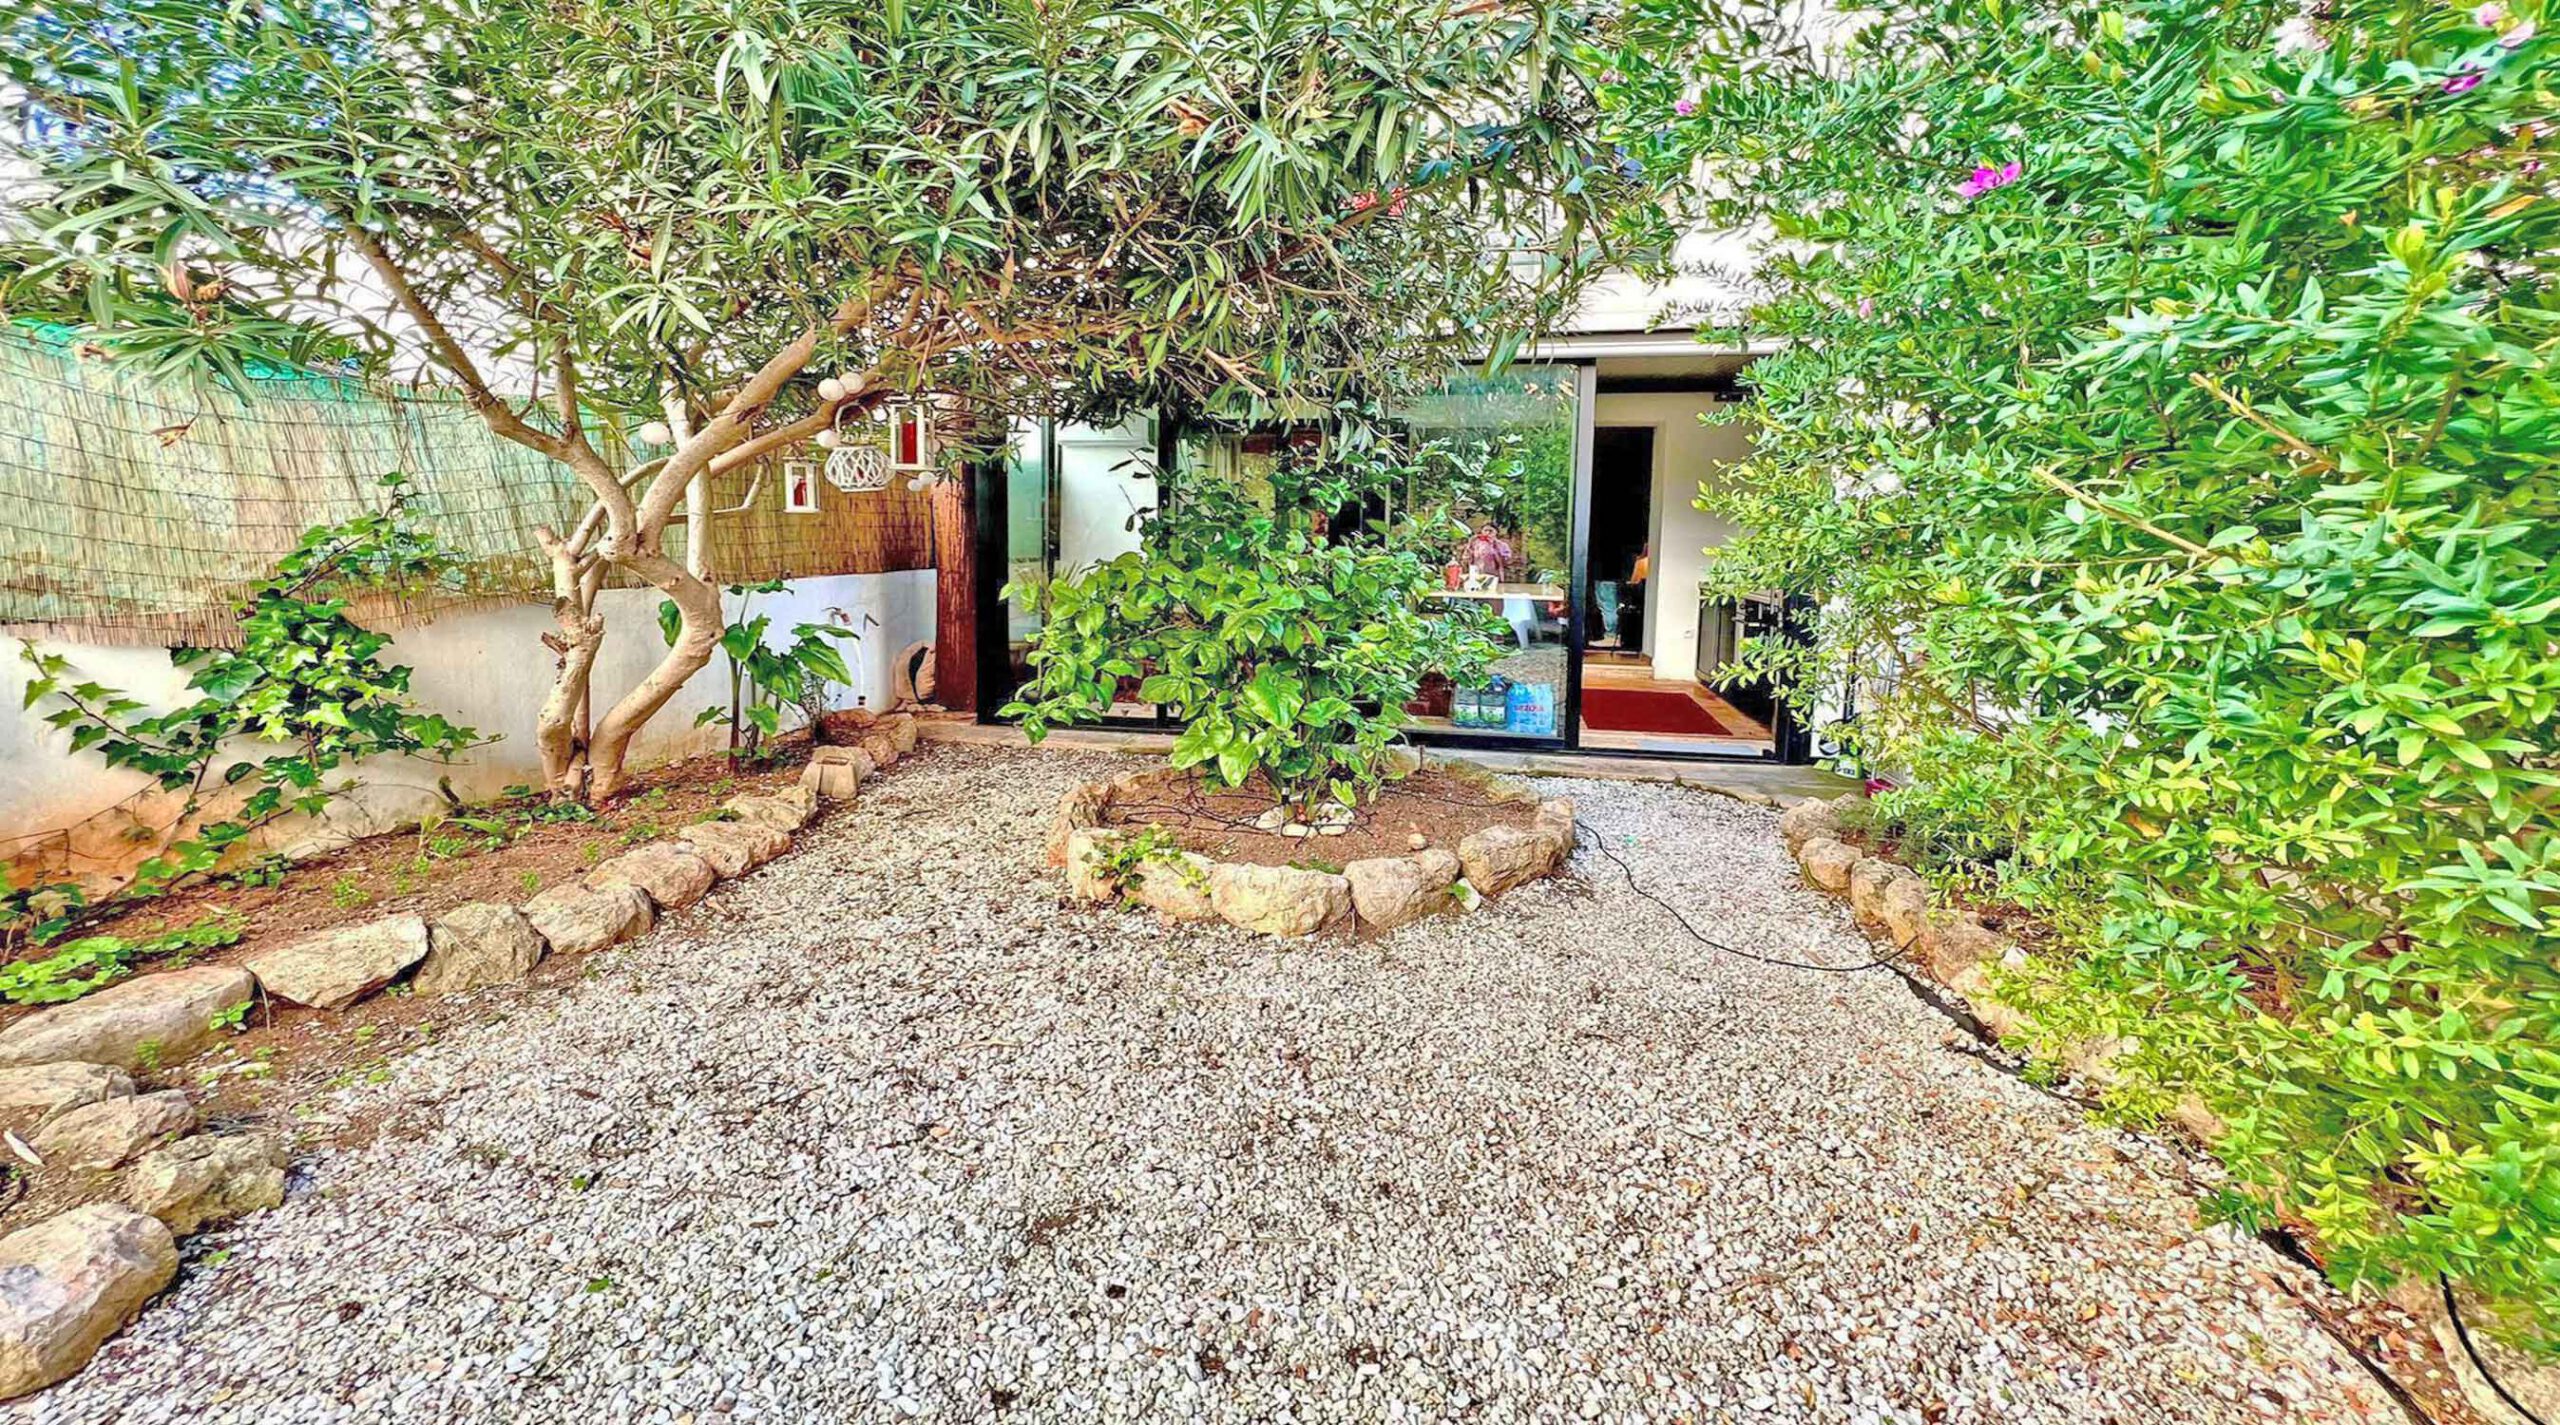 Flat with Garden in Palma